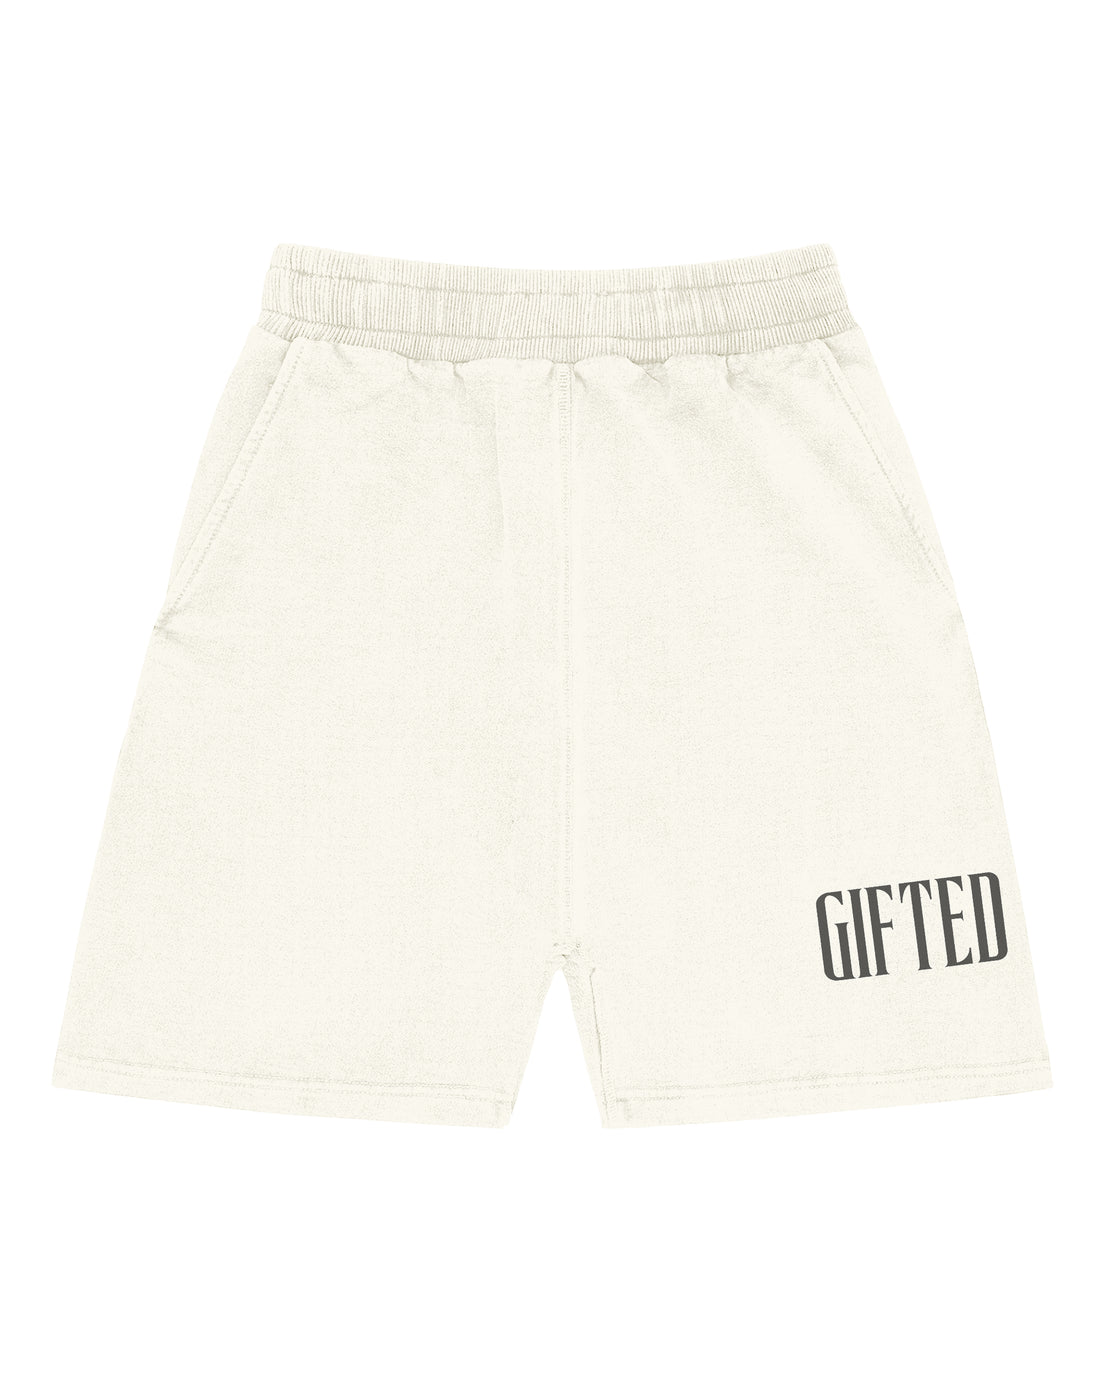 Gifted Shorts - Vintage White